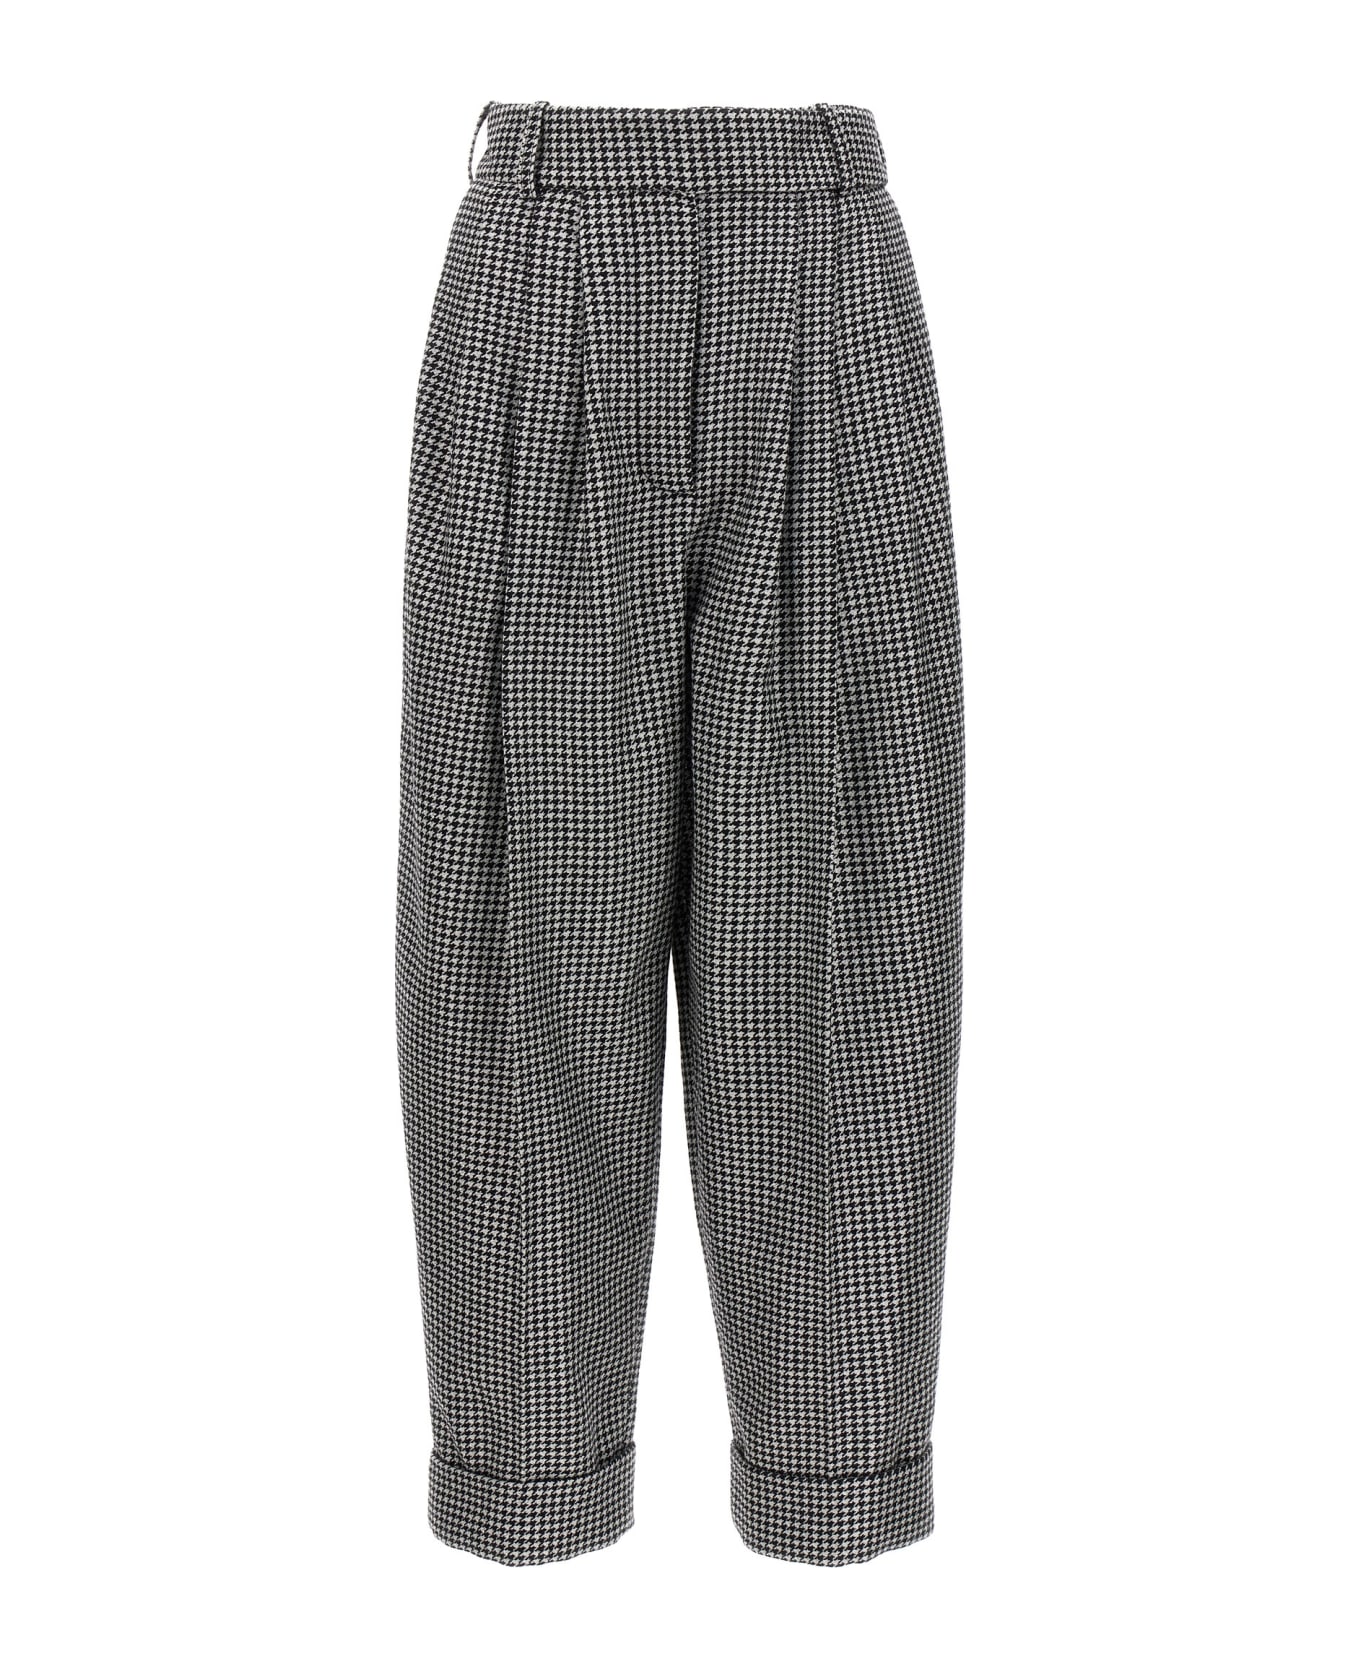 Alexandre Vauthier Metal Houndstooth Trousers - White/Black